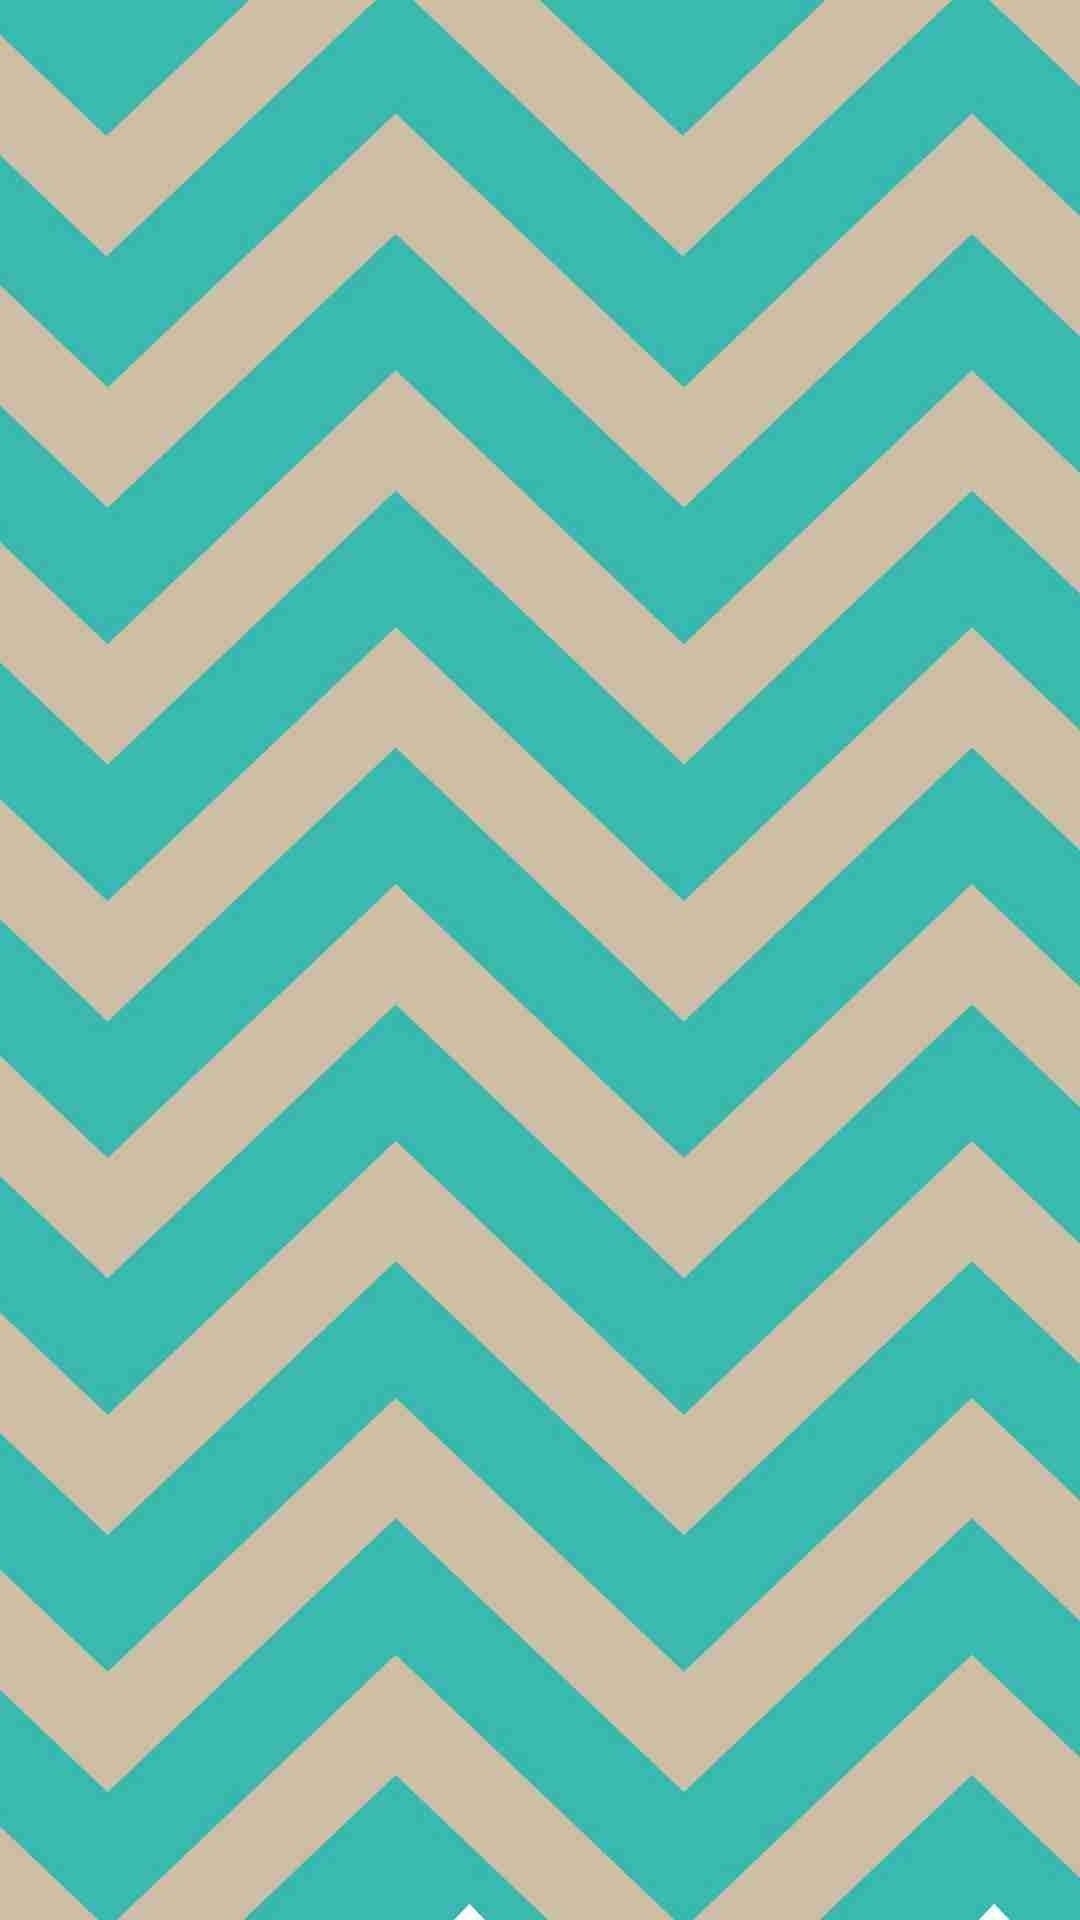 1080x1920 Home Design: Blue Chevron Pattern Wallpaper Contemporary Compact Brilliant  As Well As Stunning Textured Stainless